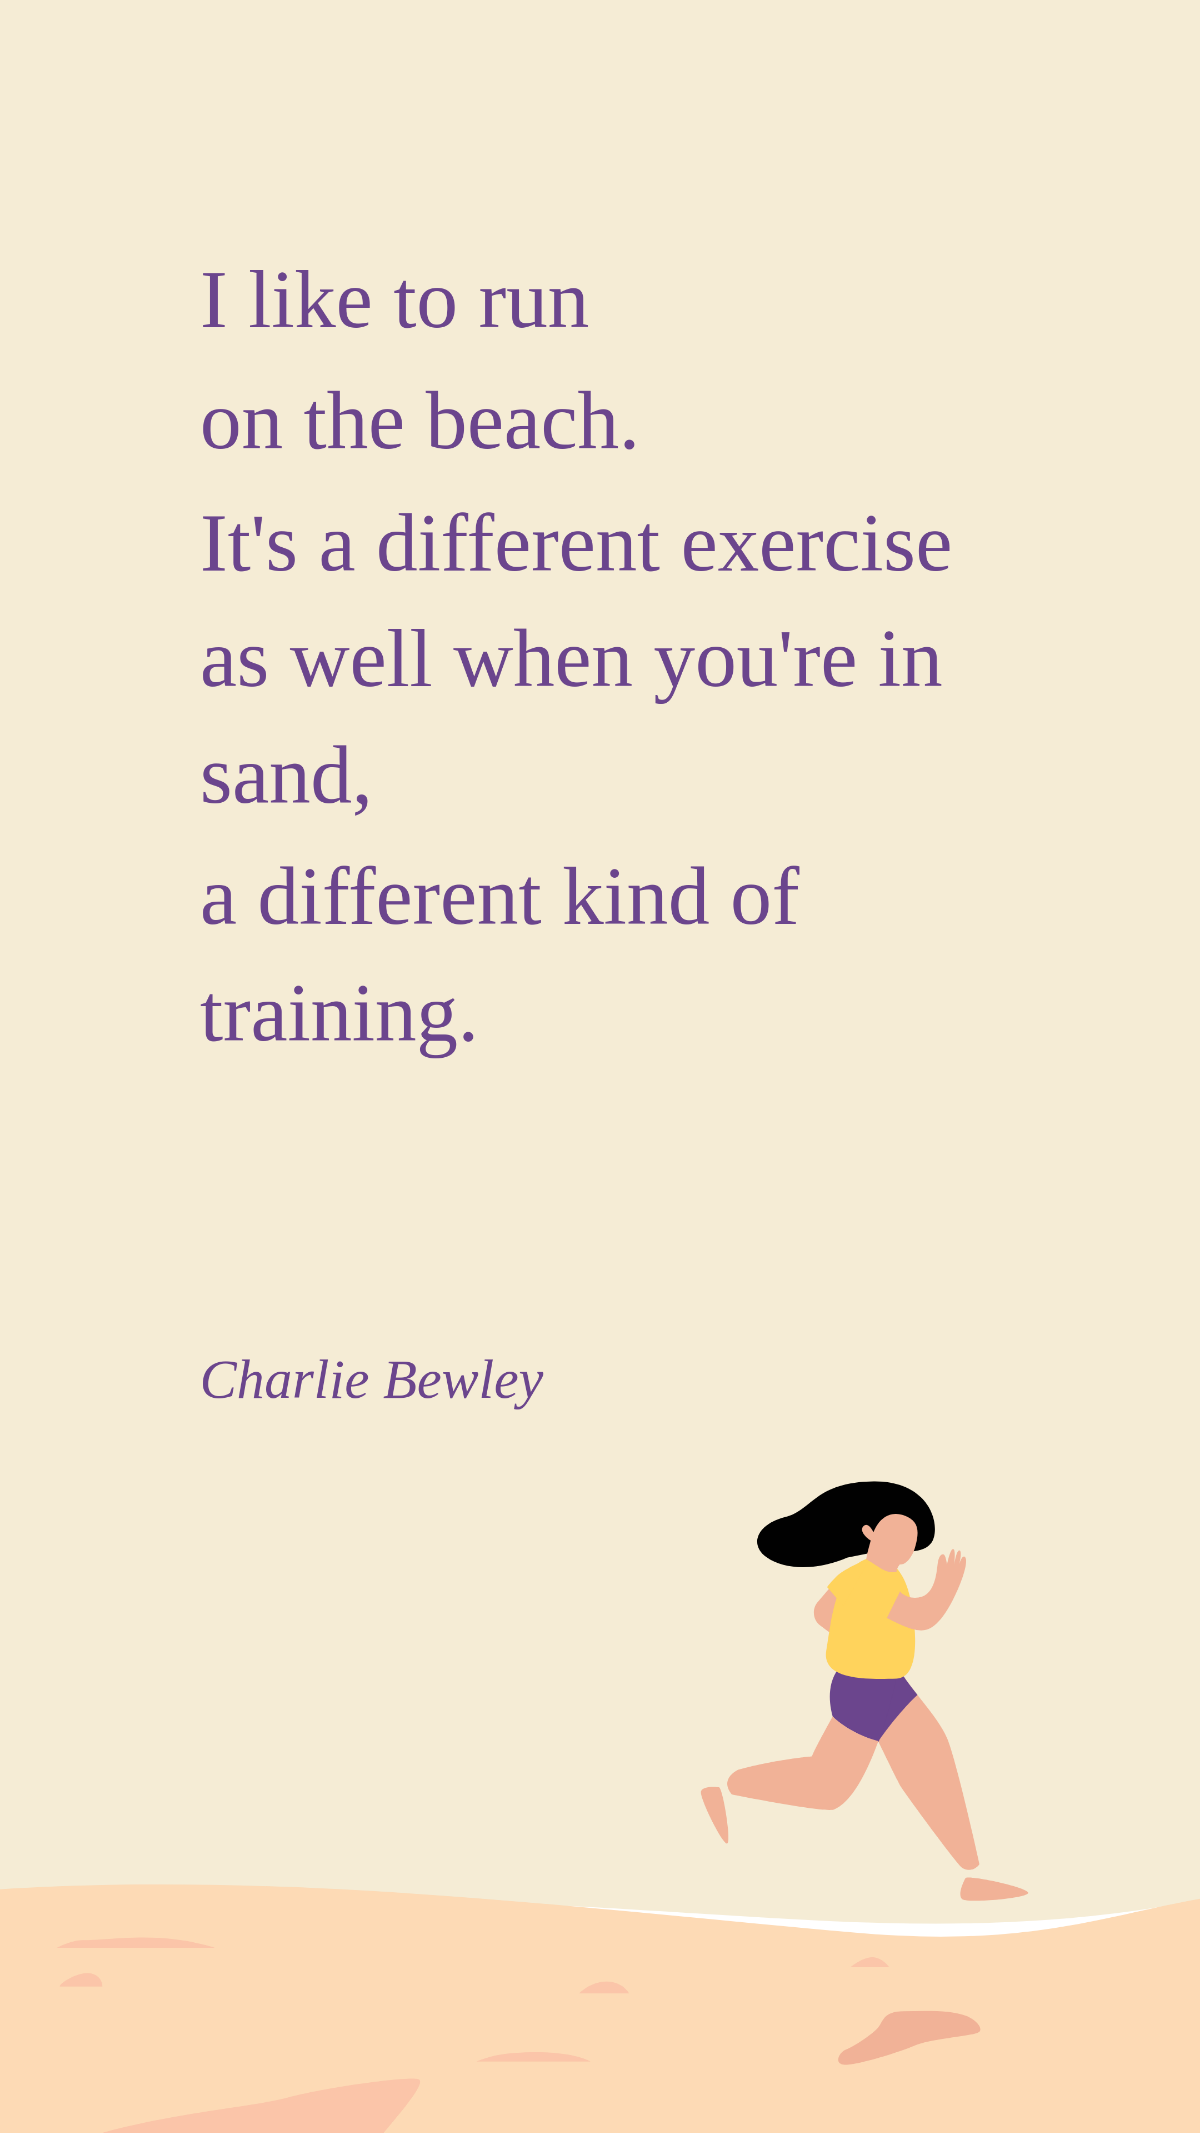 Charlie Bewley - I like to run on the beach. It's a different exercise as well when you're in sand, a different kind of training. Template